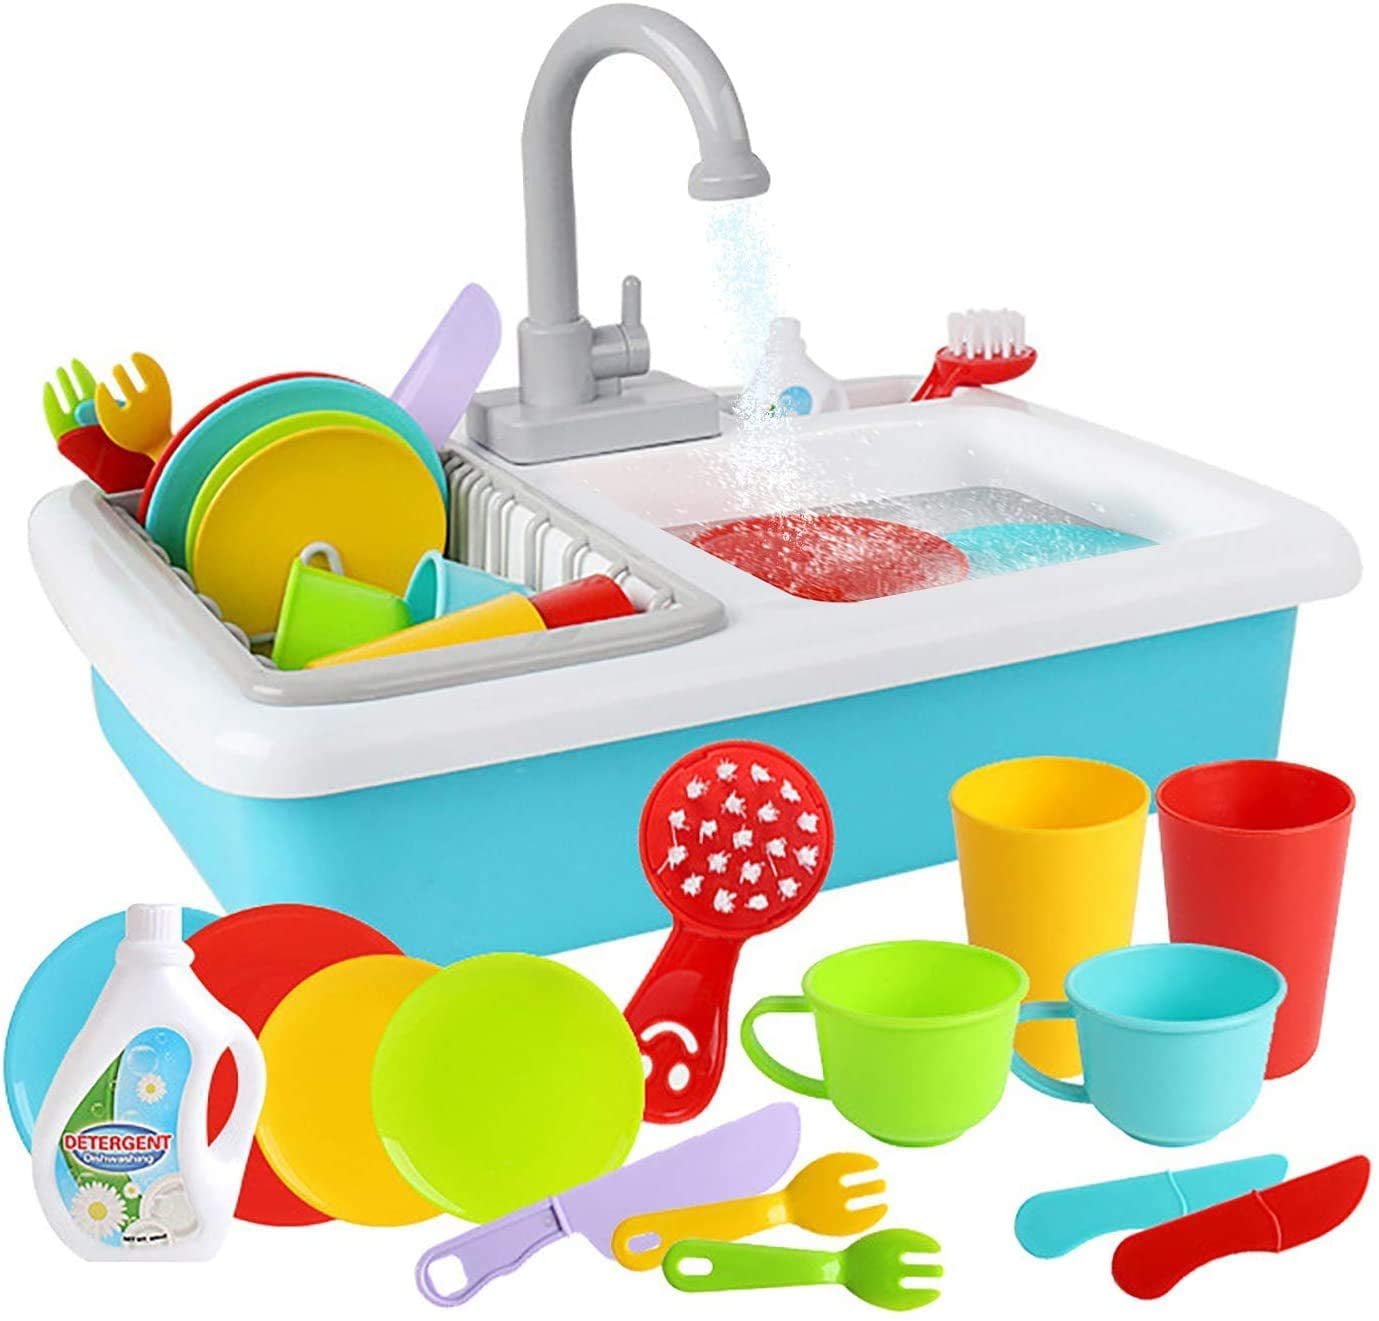 Play Kitchen Sink Set Childrens Kids Toy Roleplay Washing Up House Work Cleaning 